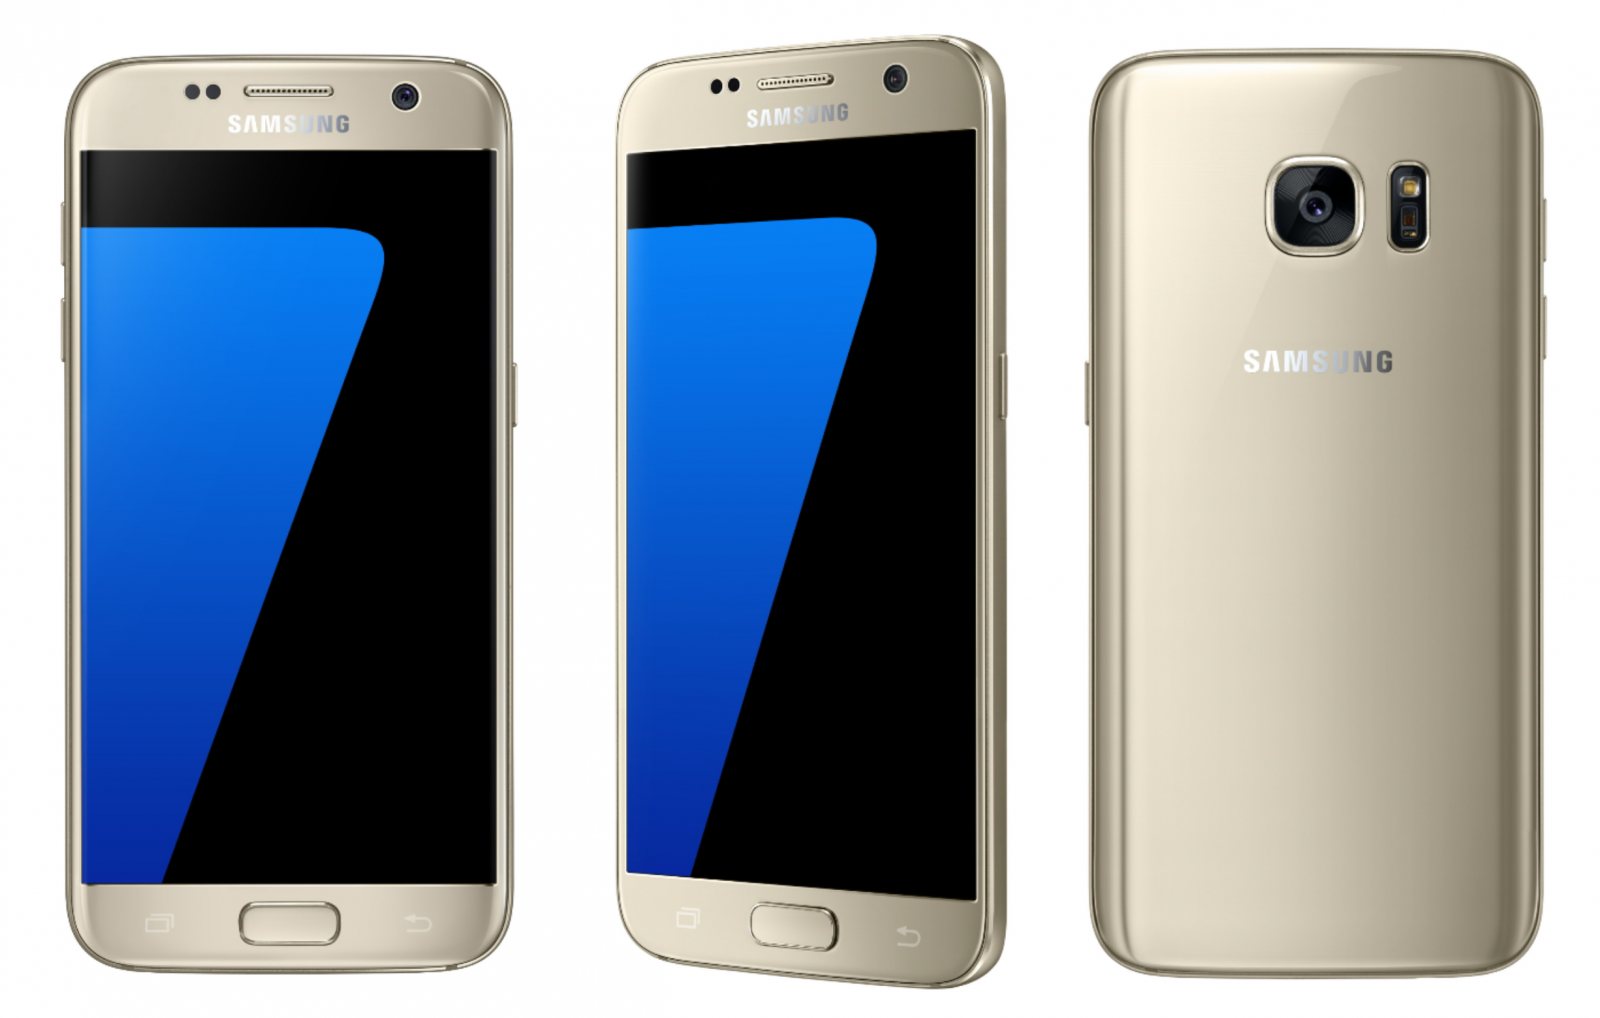 doh-samsung-s7s-industrial-design-is-as-lazy-as-ever-image-cultofandroidcomwp-contentuploads201602Samsung-Galaxy-S7-gold-png